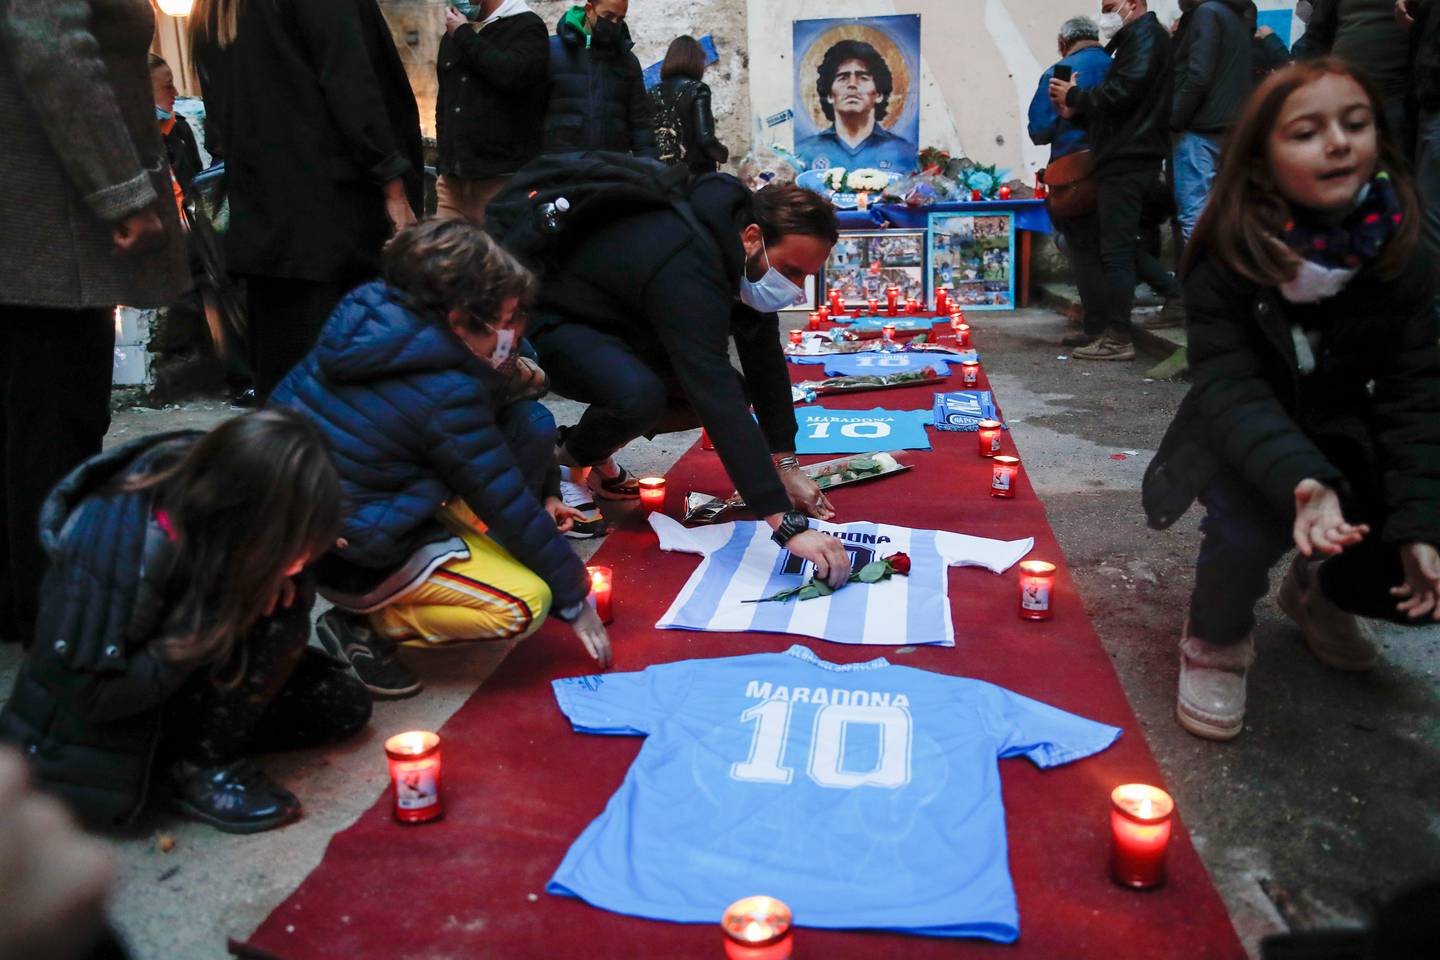 People gather and light candles to honor soccer legend Diego Maradona, at the popular "Quartieri Spagnoli" neighborhood, in Naples, Thursday, Nov. 26, 2020. Maradona died on Wednesday at the age of 60 of a heart attack in a house outside Buenos Aires where he recovered from a brain operation. (AP Photo/Alessandra Tarantino)